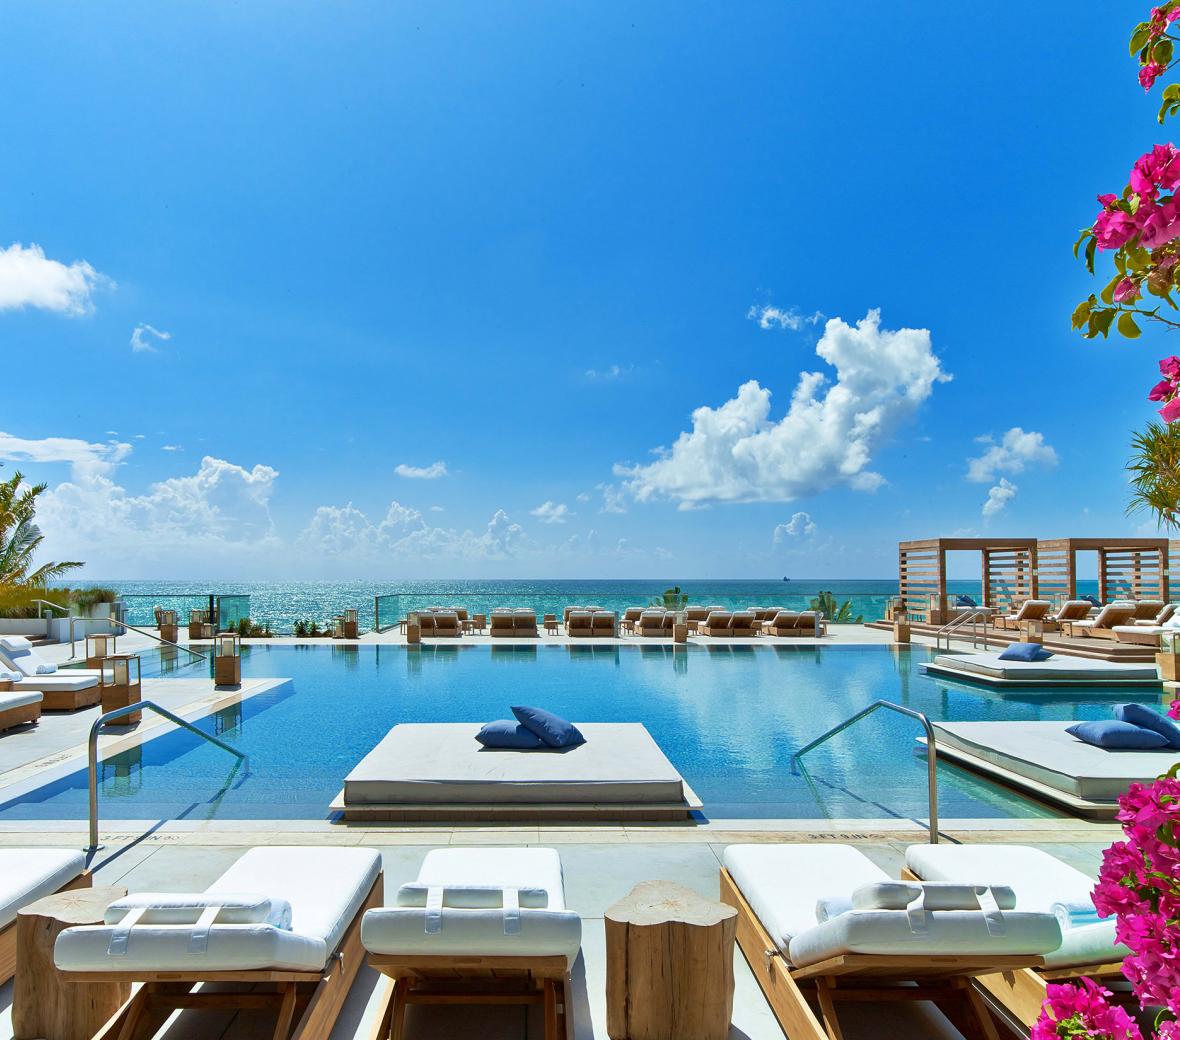 South Beach pool surrounded by cabanas and day loungers